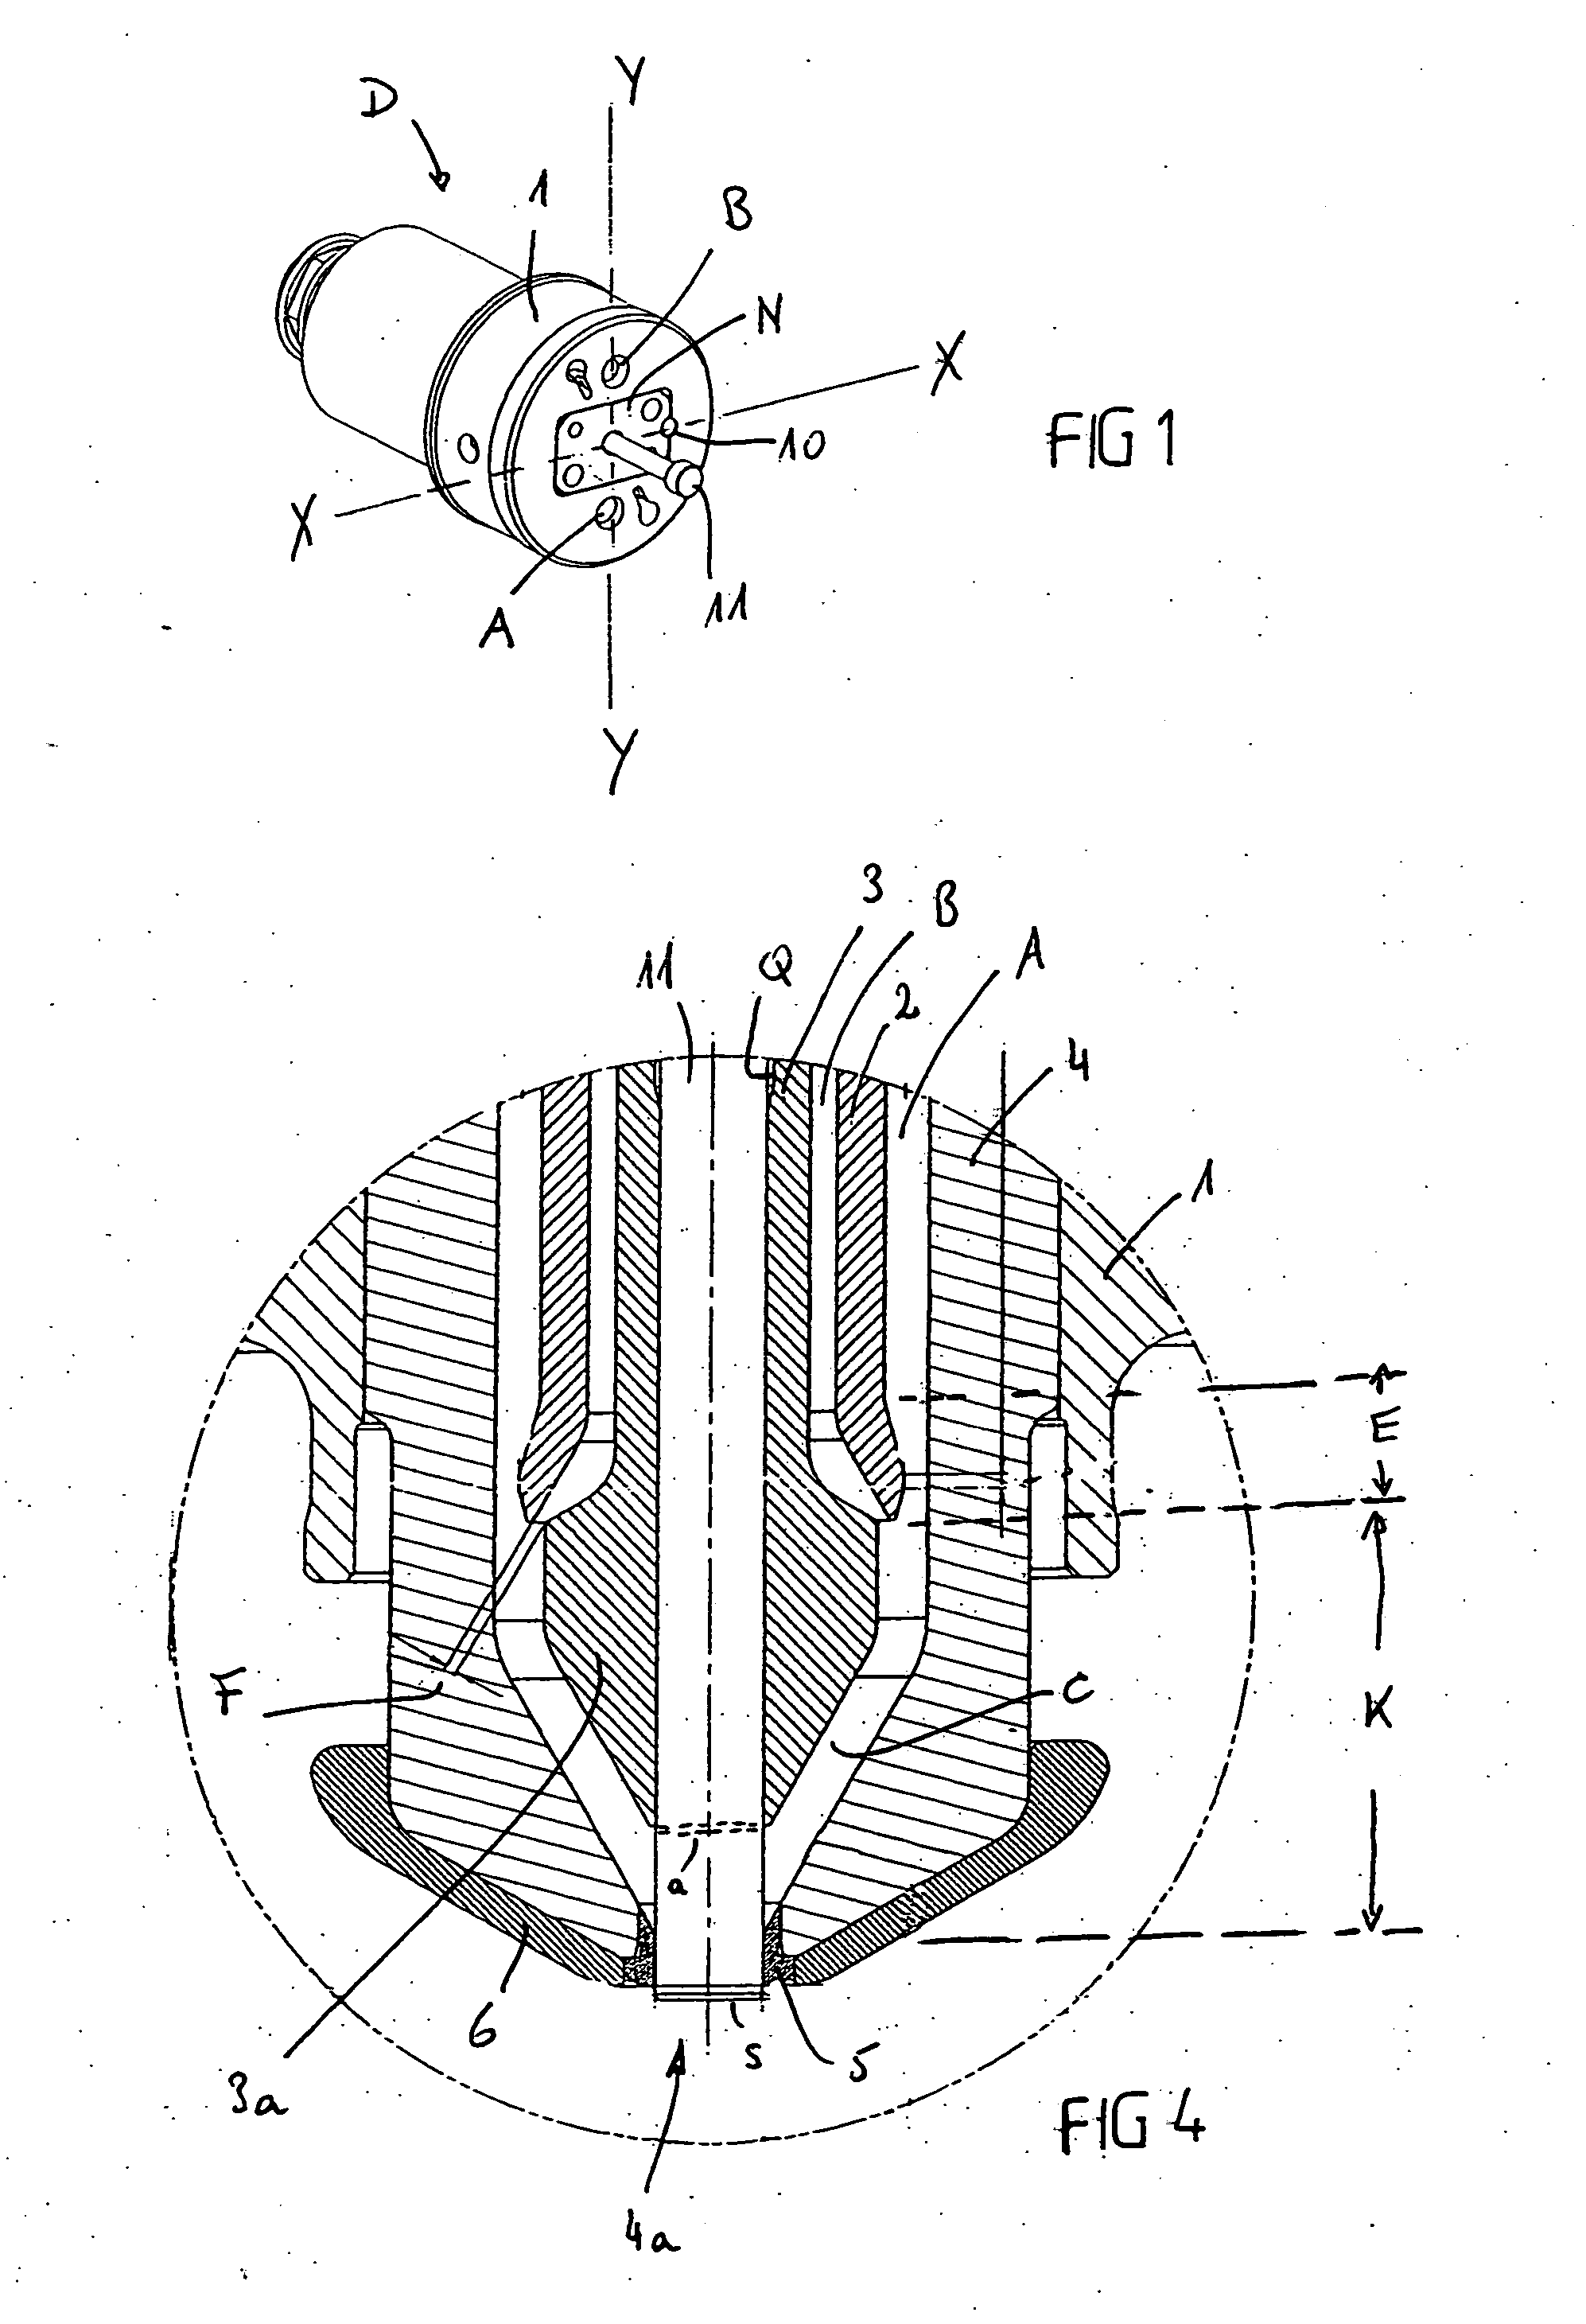 Coinjection nozzle